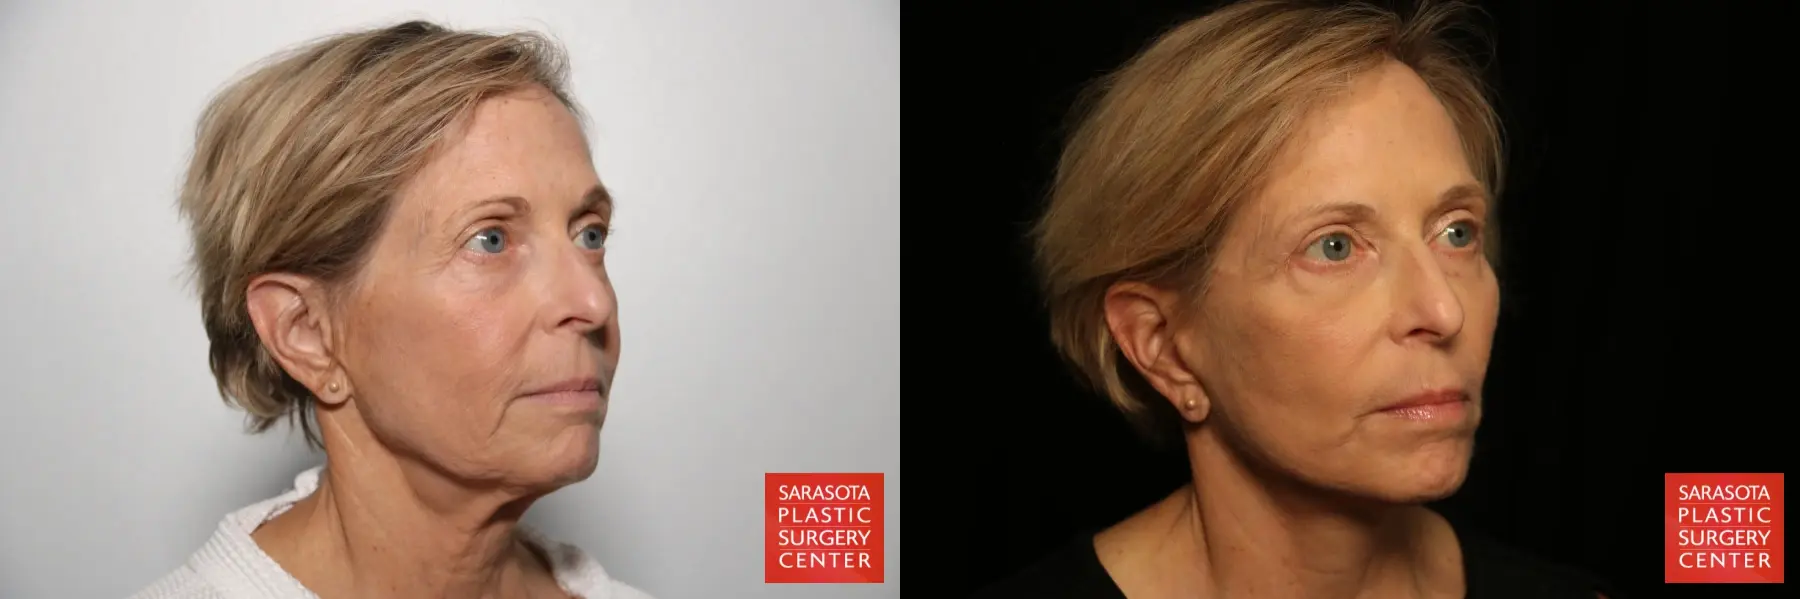 Facelift: Patient 43 - Before and After 2